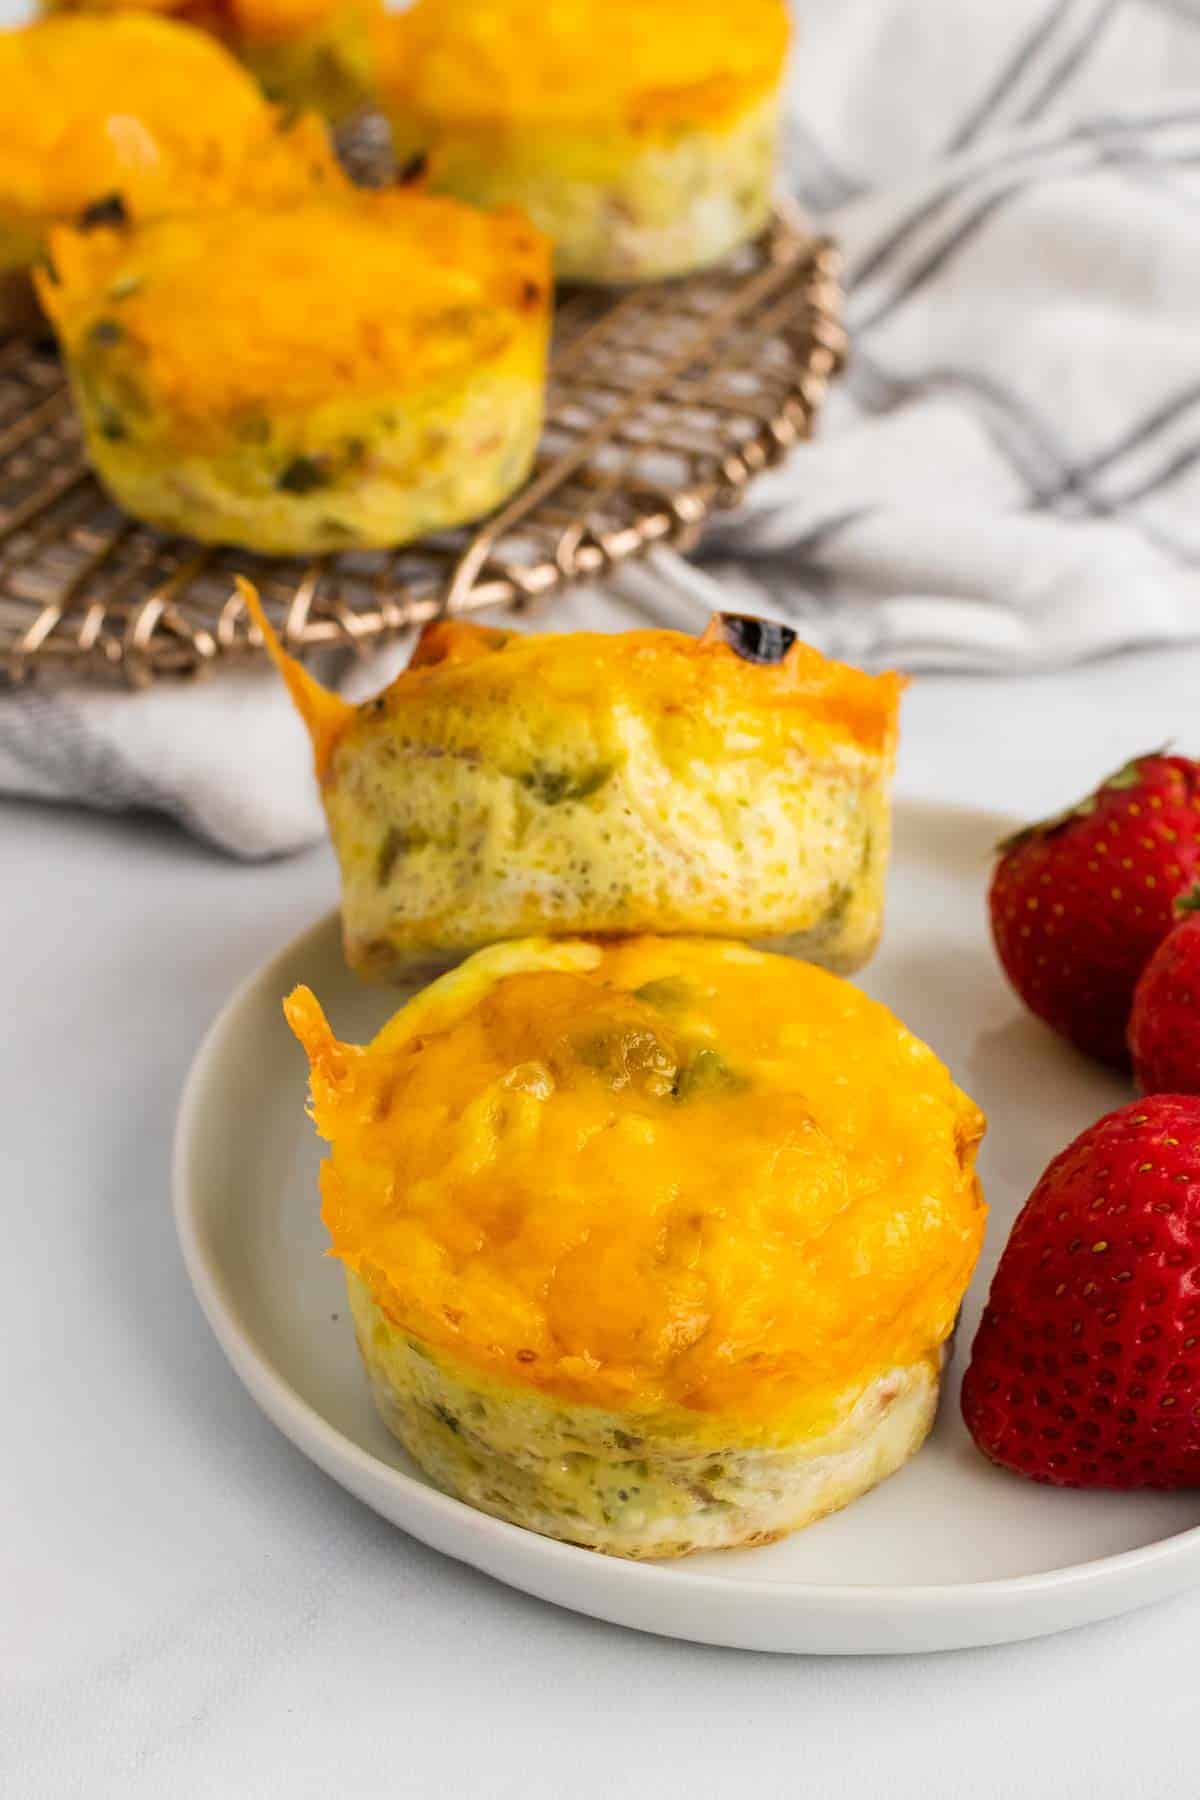 Plate with two egg muffins and strawberries